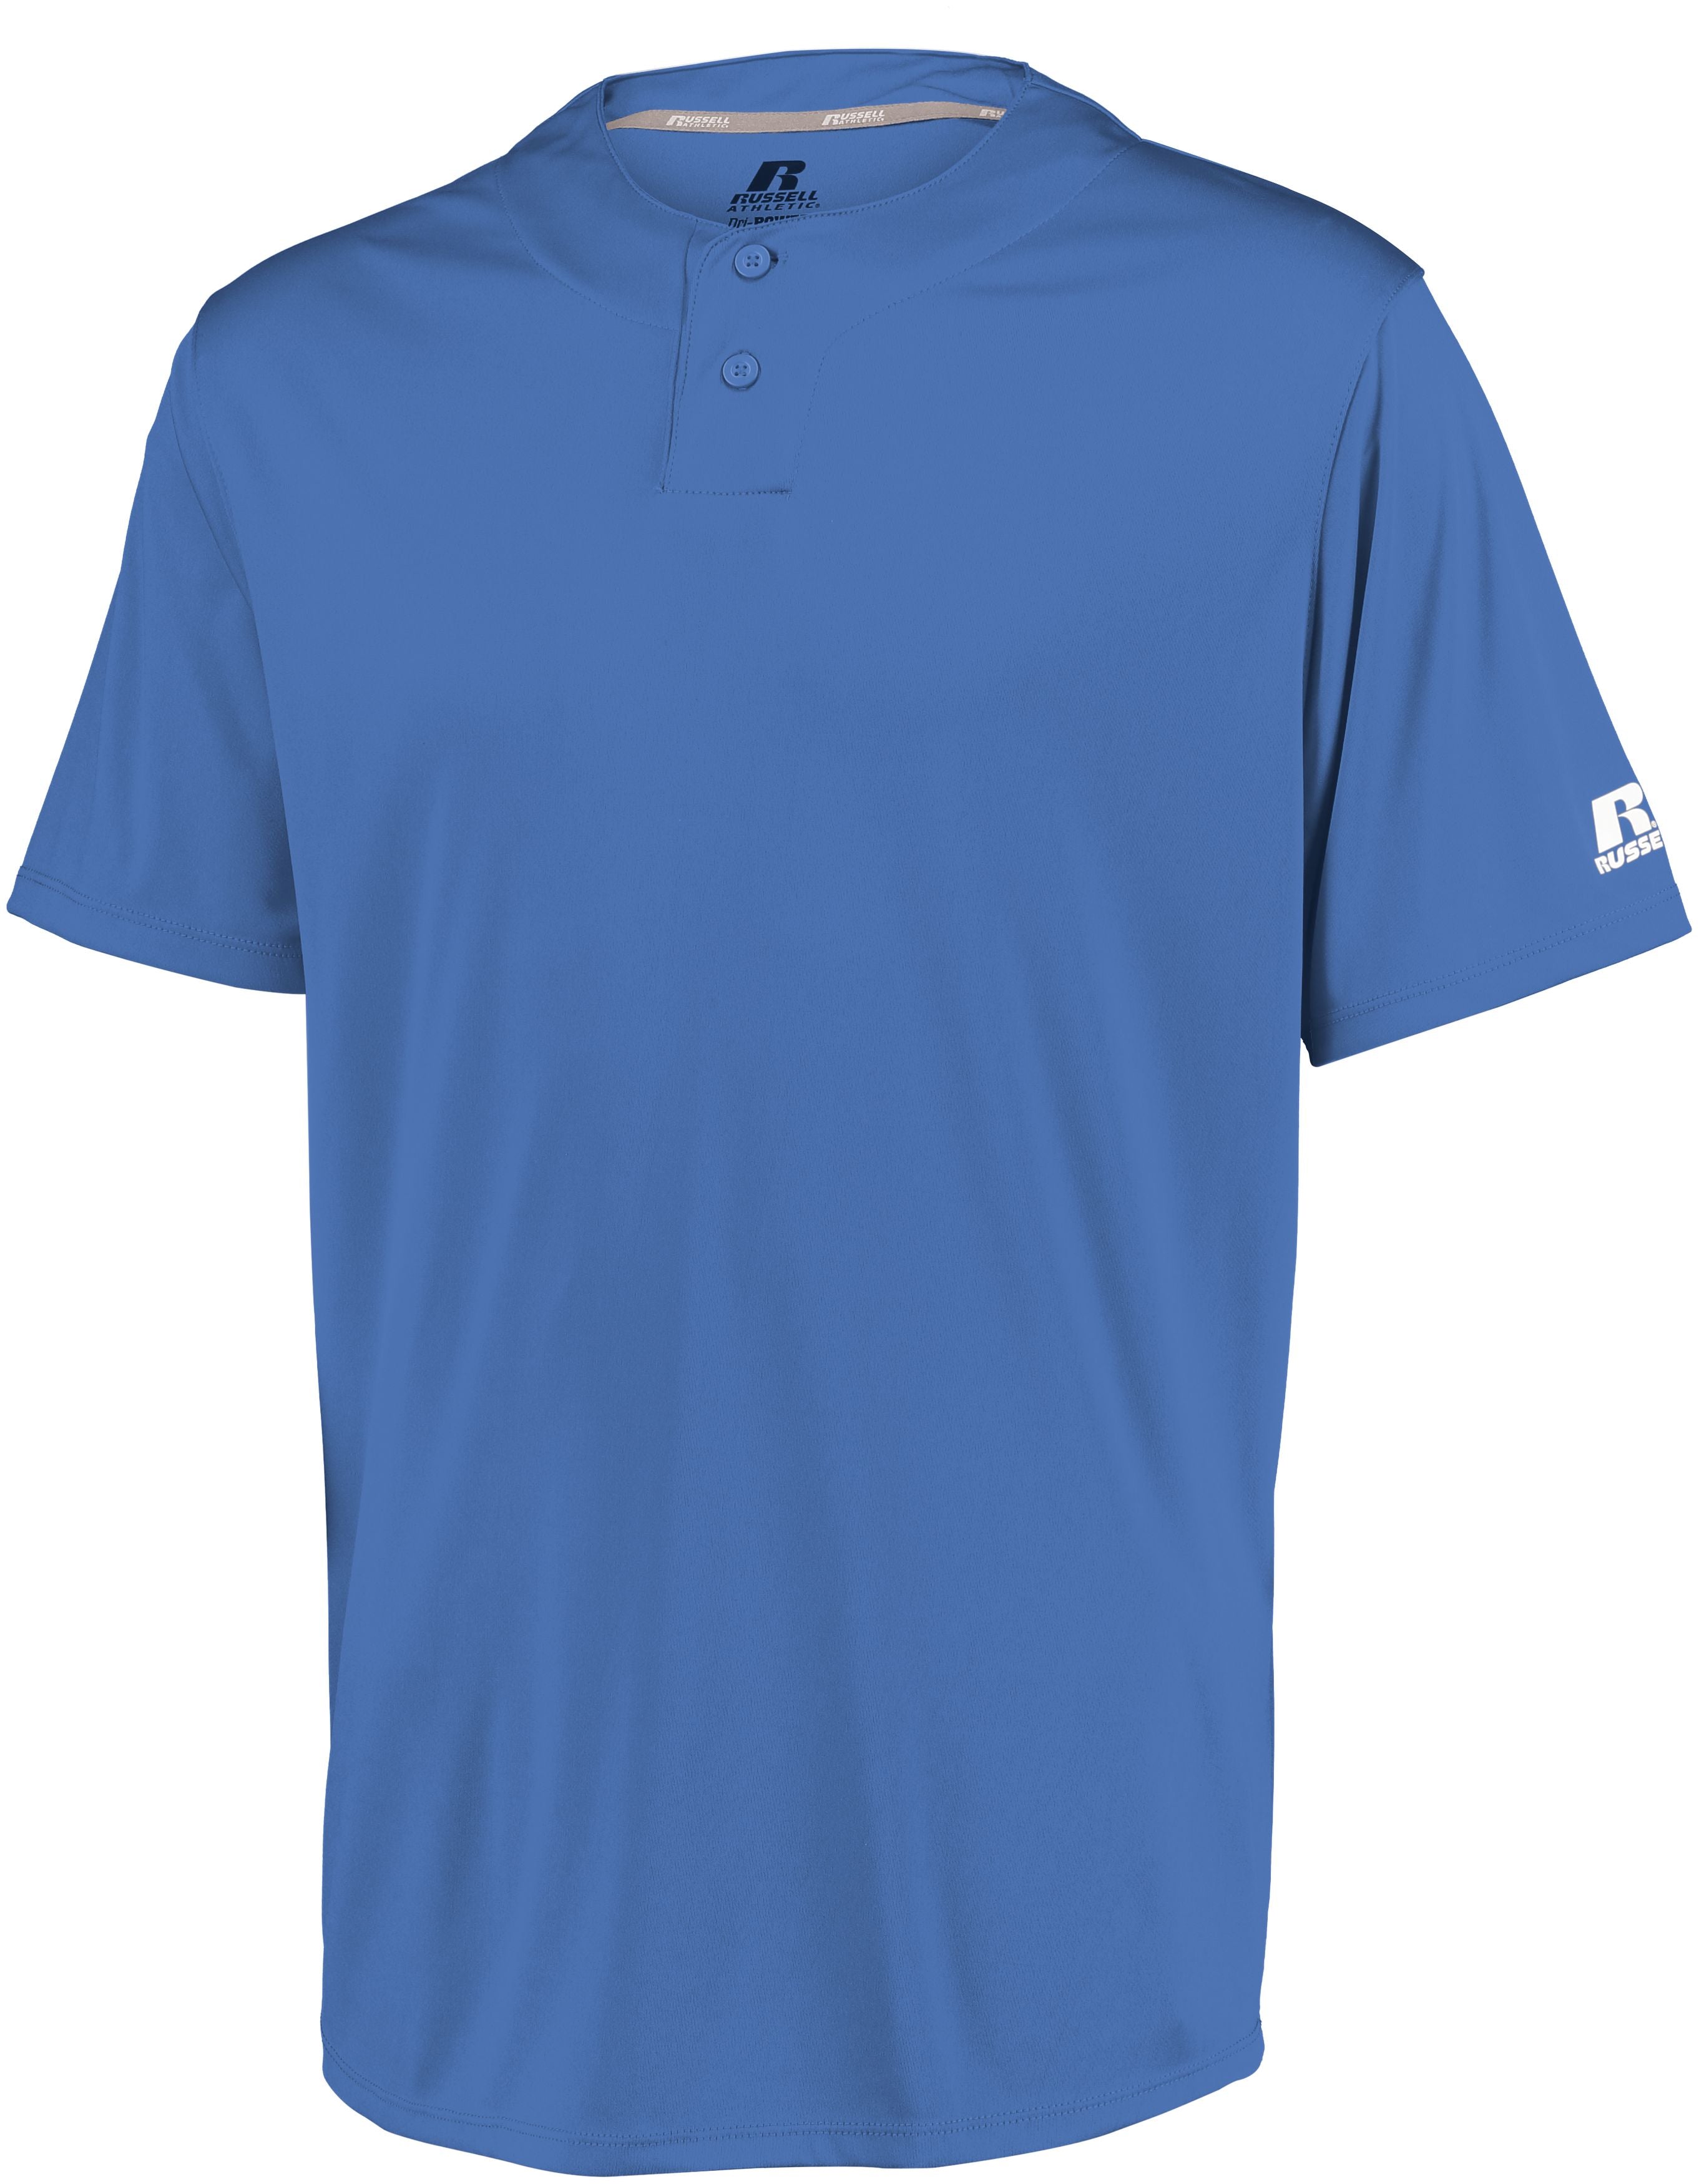 Russell Athletic Performance Two-Button Solid Jersey in Columbia Blue  -Part of the Adult, Adult-Jersey, Baseball, Russell-Athletic-Products, Shirts, All-Sports, All-Sports-1 product lines at KanaleyCreations.com